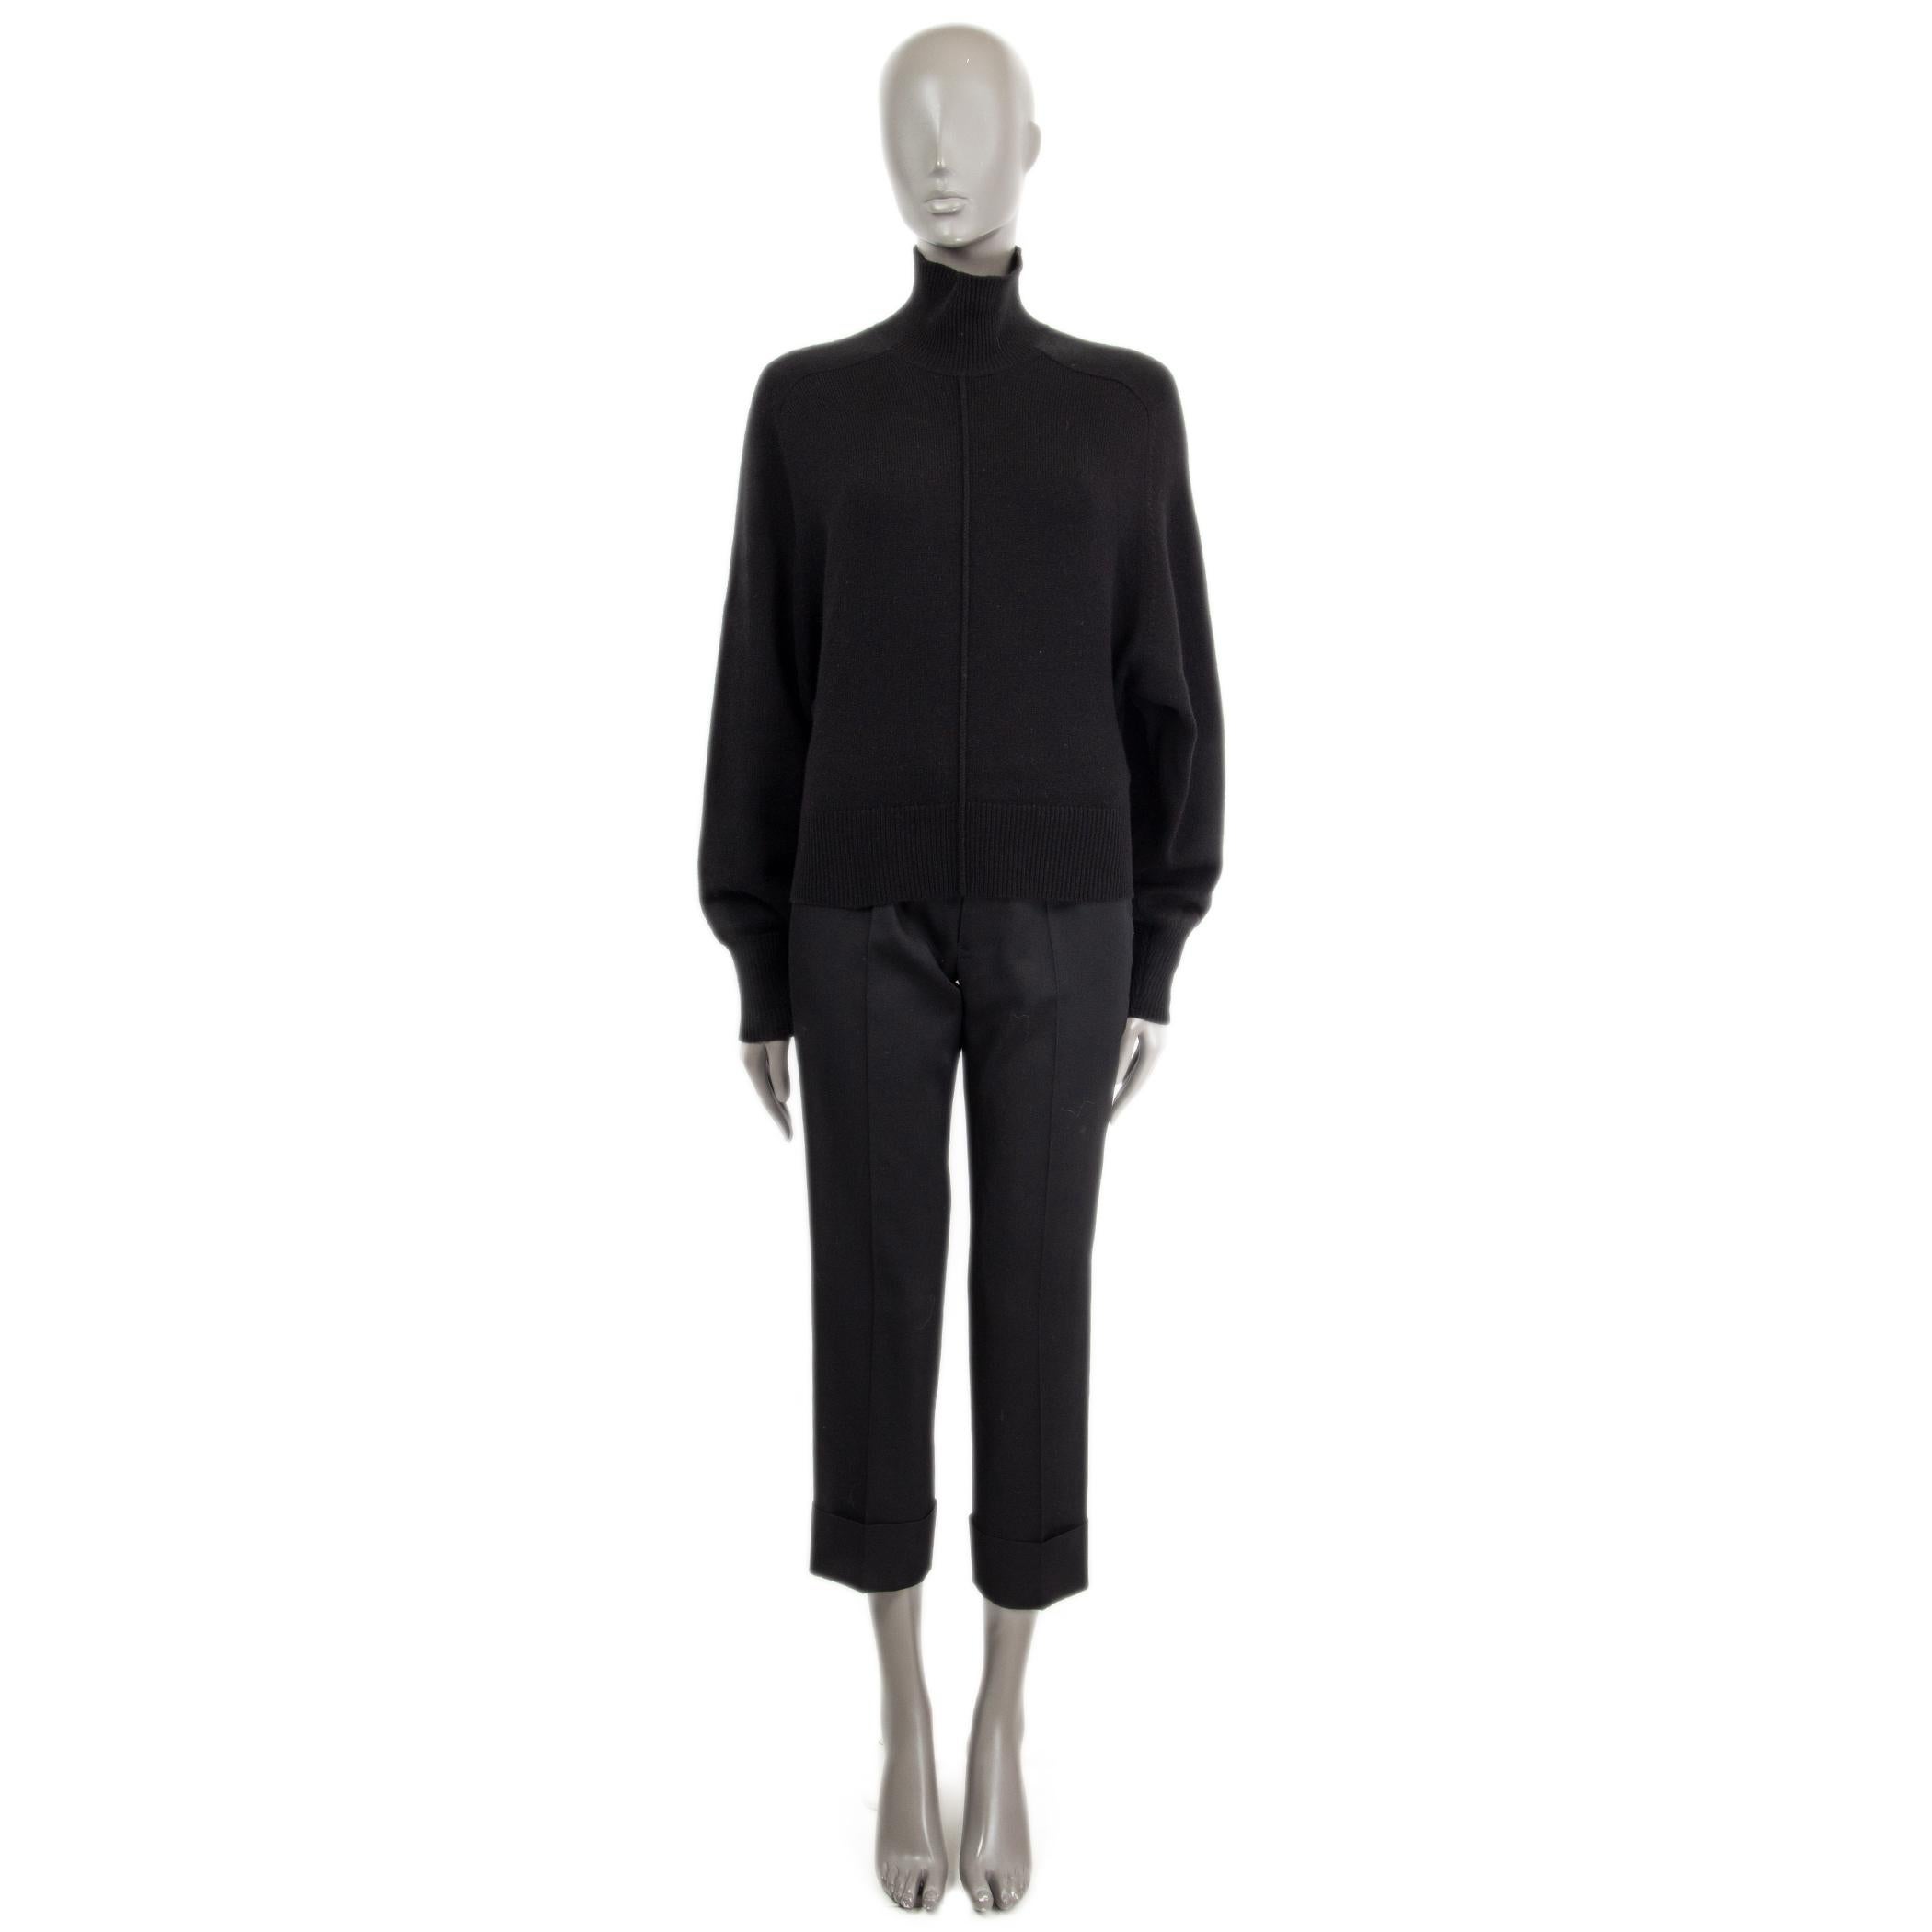 100% authentic Chloé raglan sleeve turtleneck knit sweater in black cashmere (100%) with ribbed-knit edges. Has been worn and is in excellent condition. 

Measurements
Tag Size	S
Size	S
Shoulder Width	43cm (16.8in)
Bust From	108cm (42.1in)
Waist